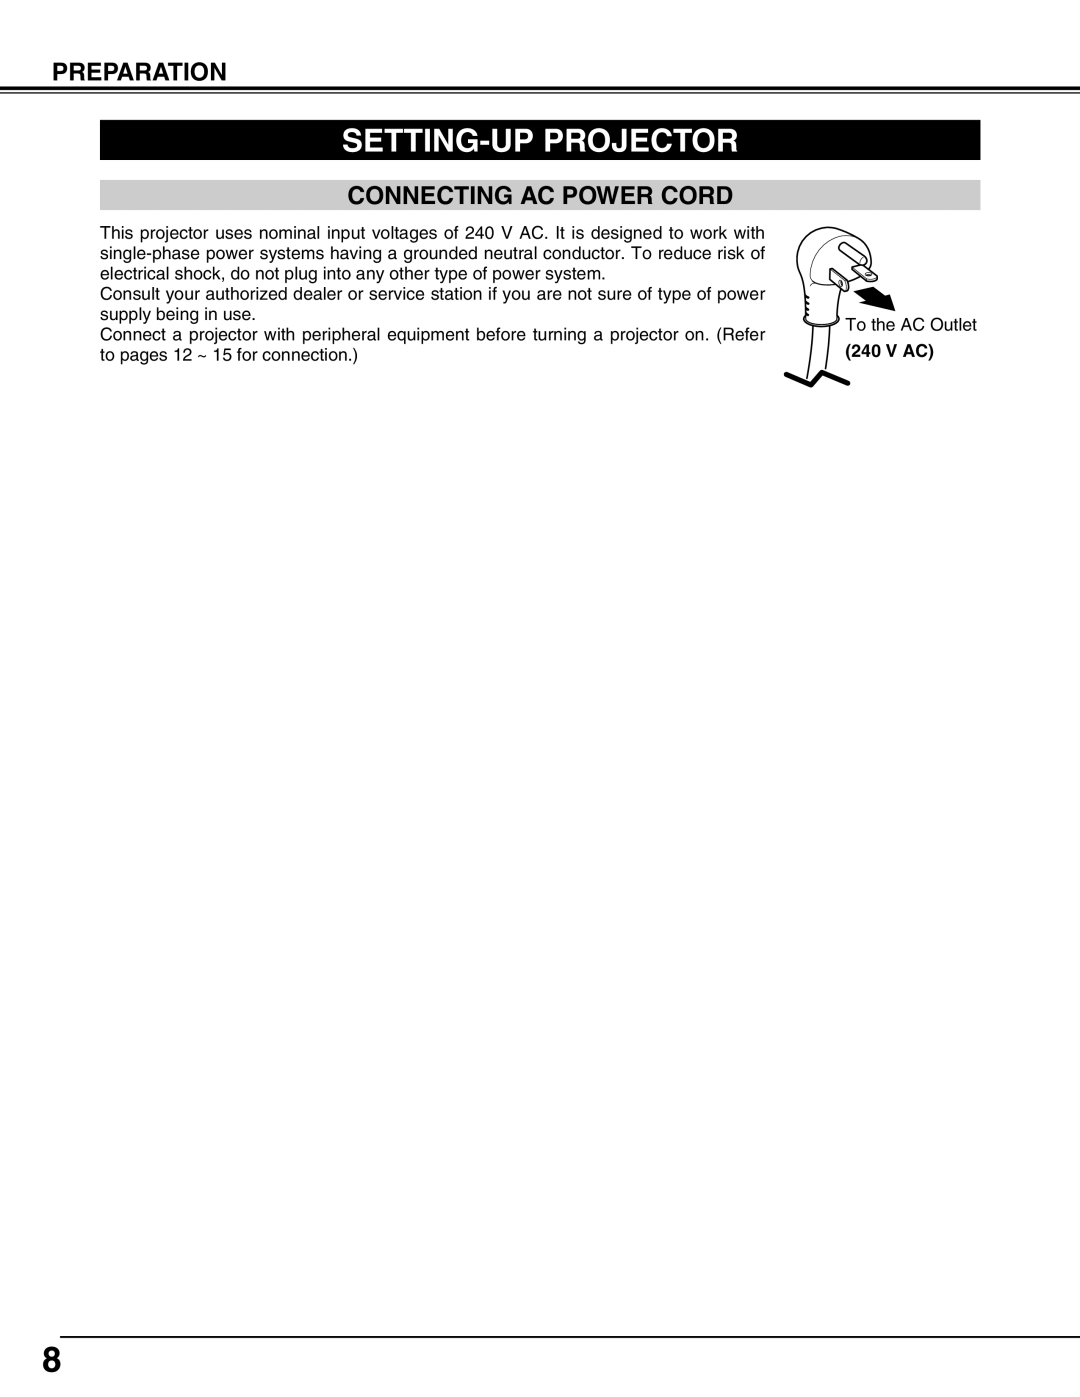 Sanyo PLV-HD150 owner manual Setting-Upprojector, Preparation, Connecting Ac Power Cord 